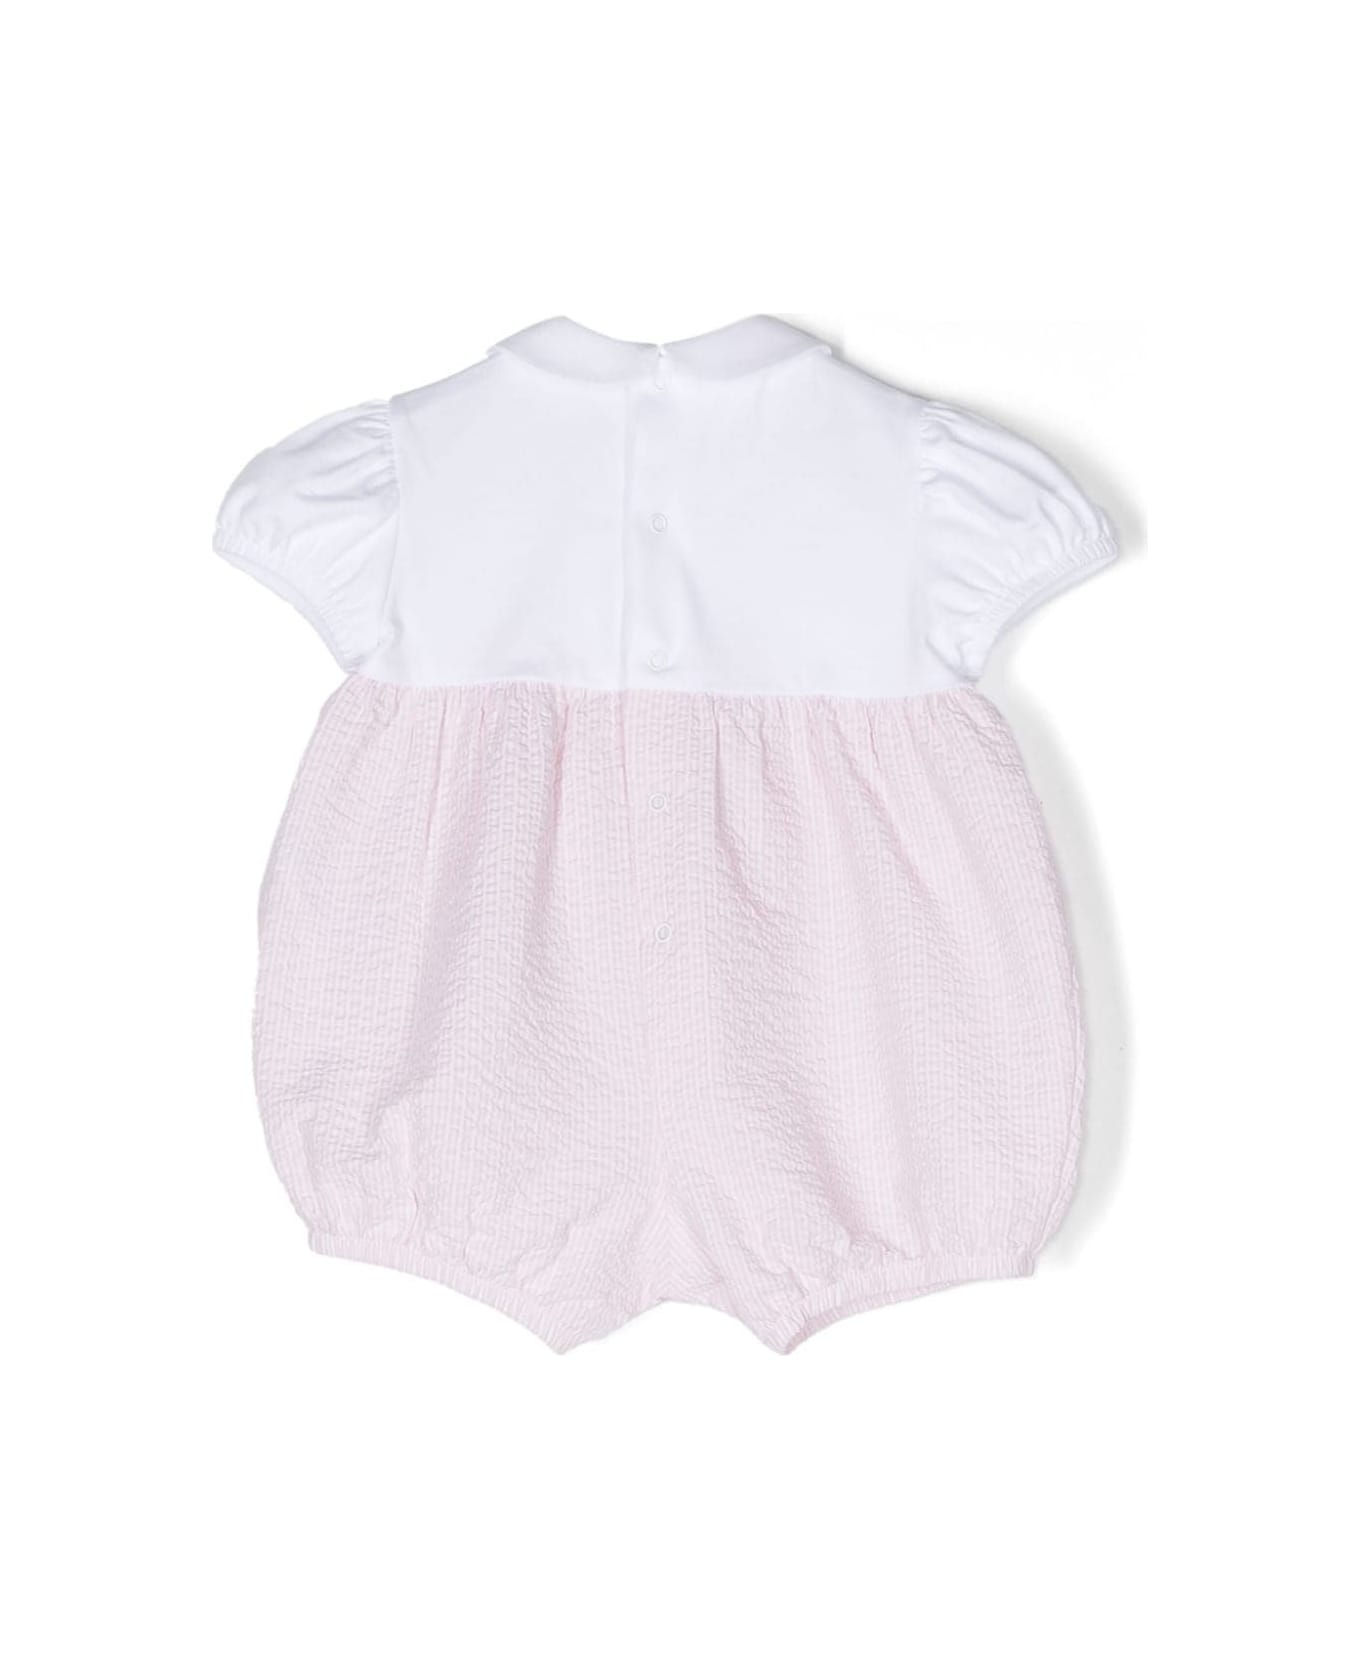 Il Gufo Pink And White Bimateric Short Playsuit With Appliqué Flowers - Pink ボディスーツ＆セットアップ